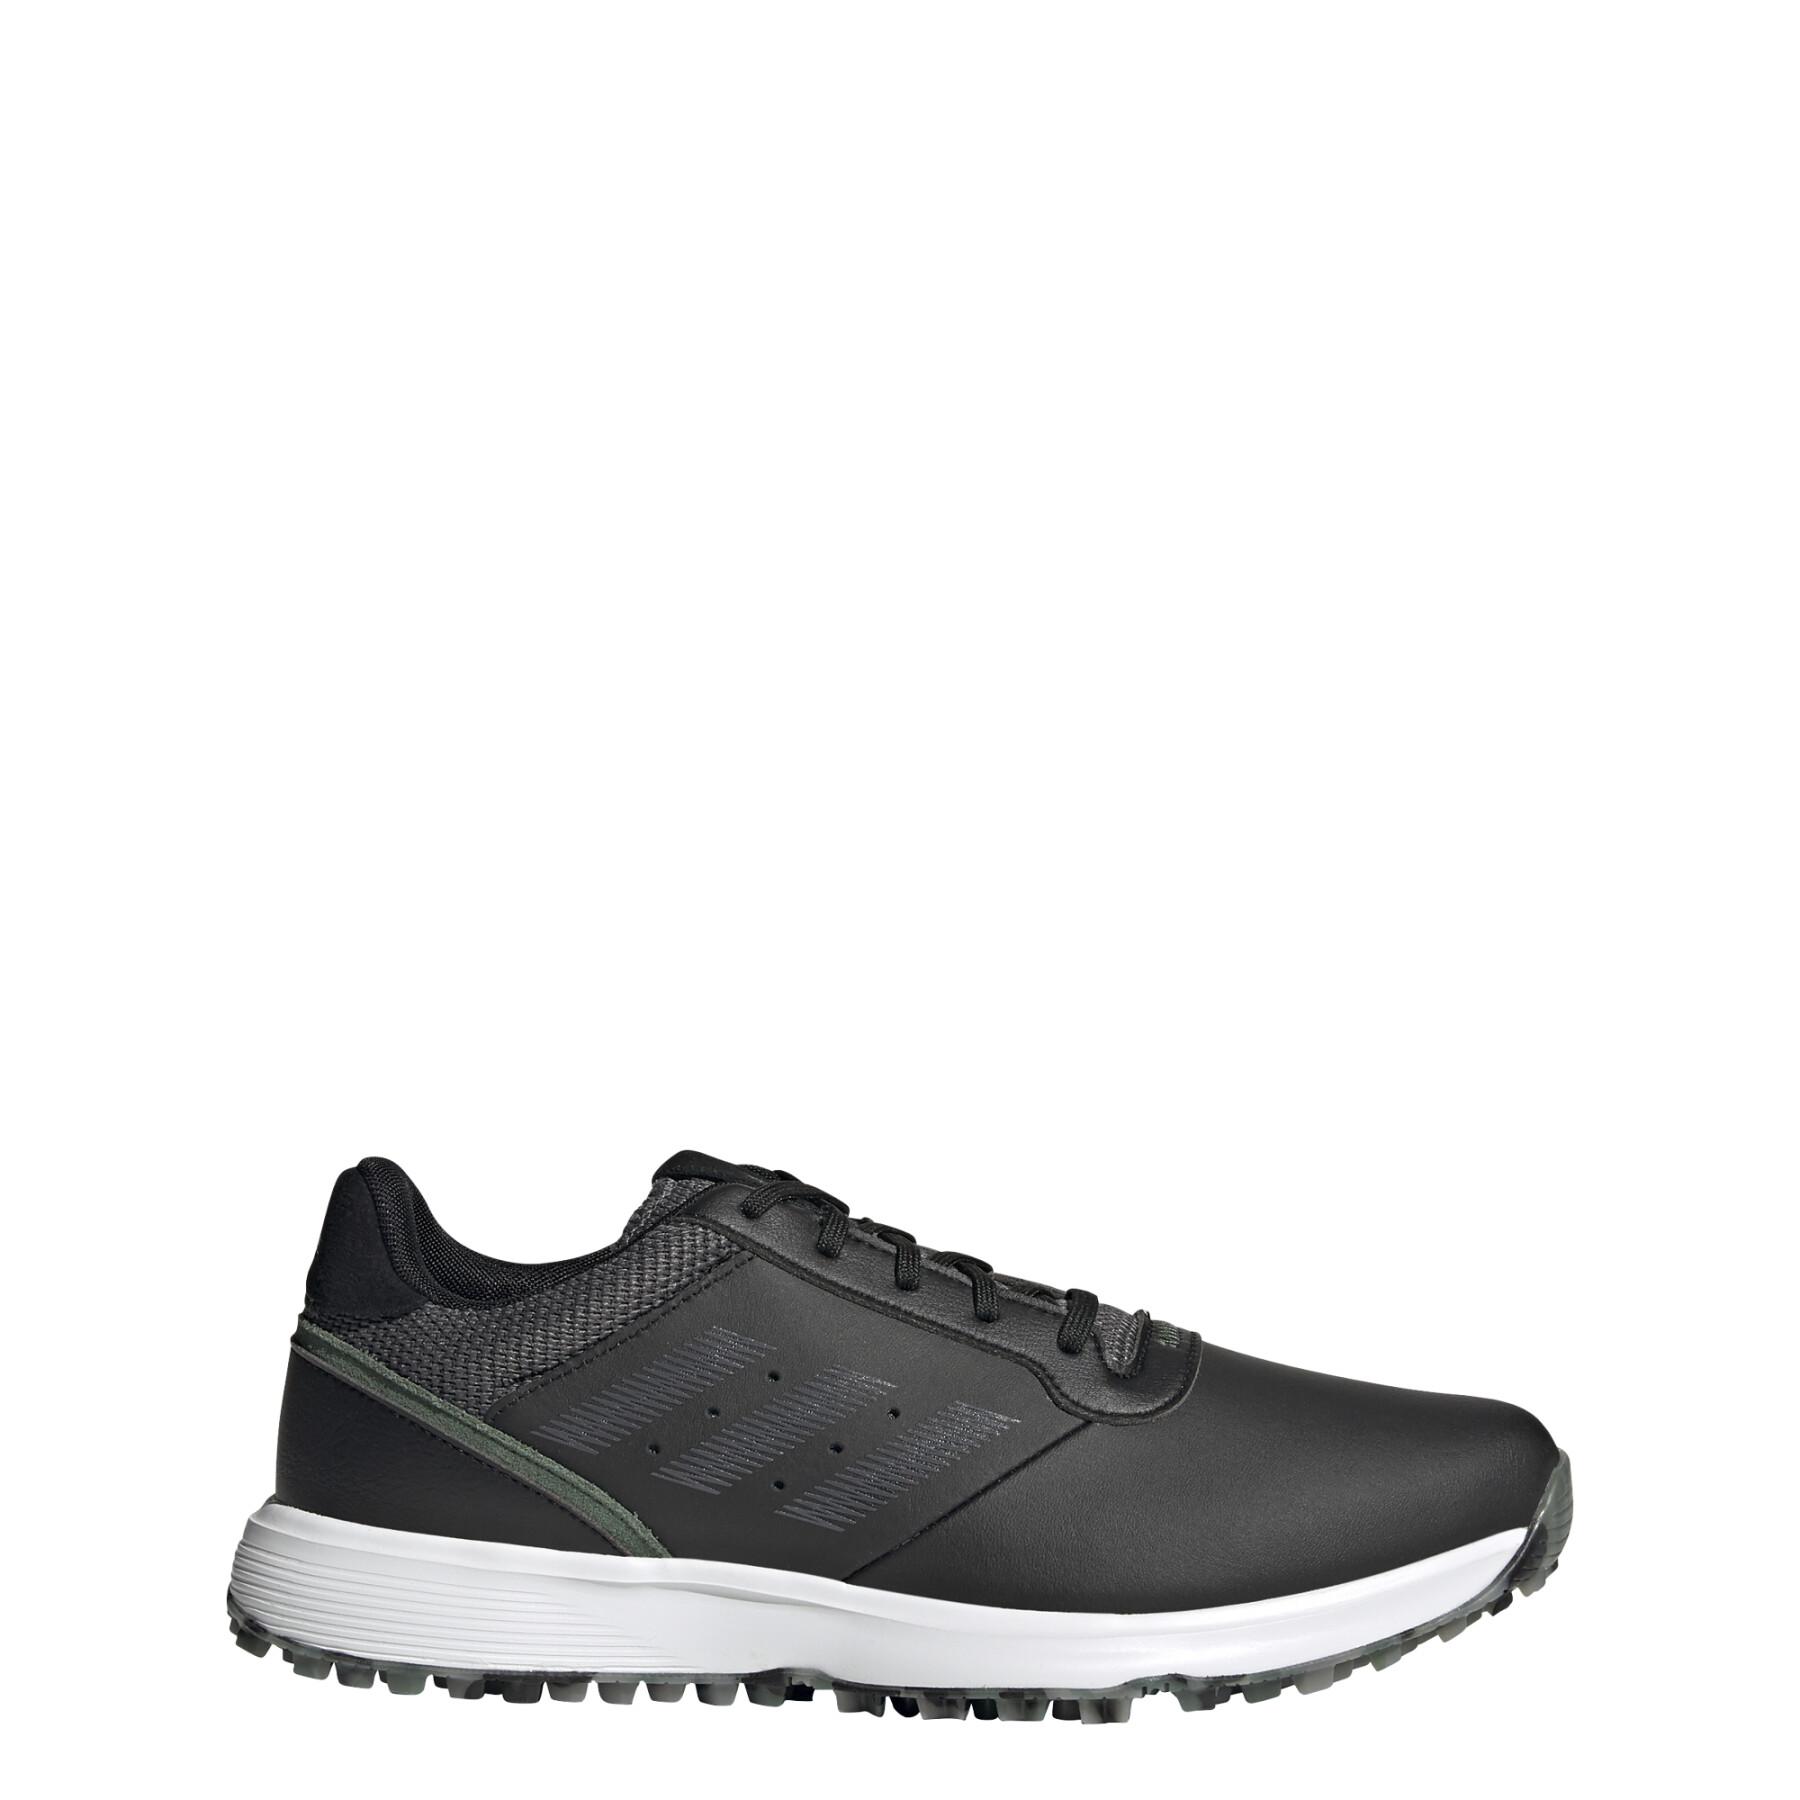 Zapatos adidas S2G Leather